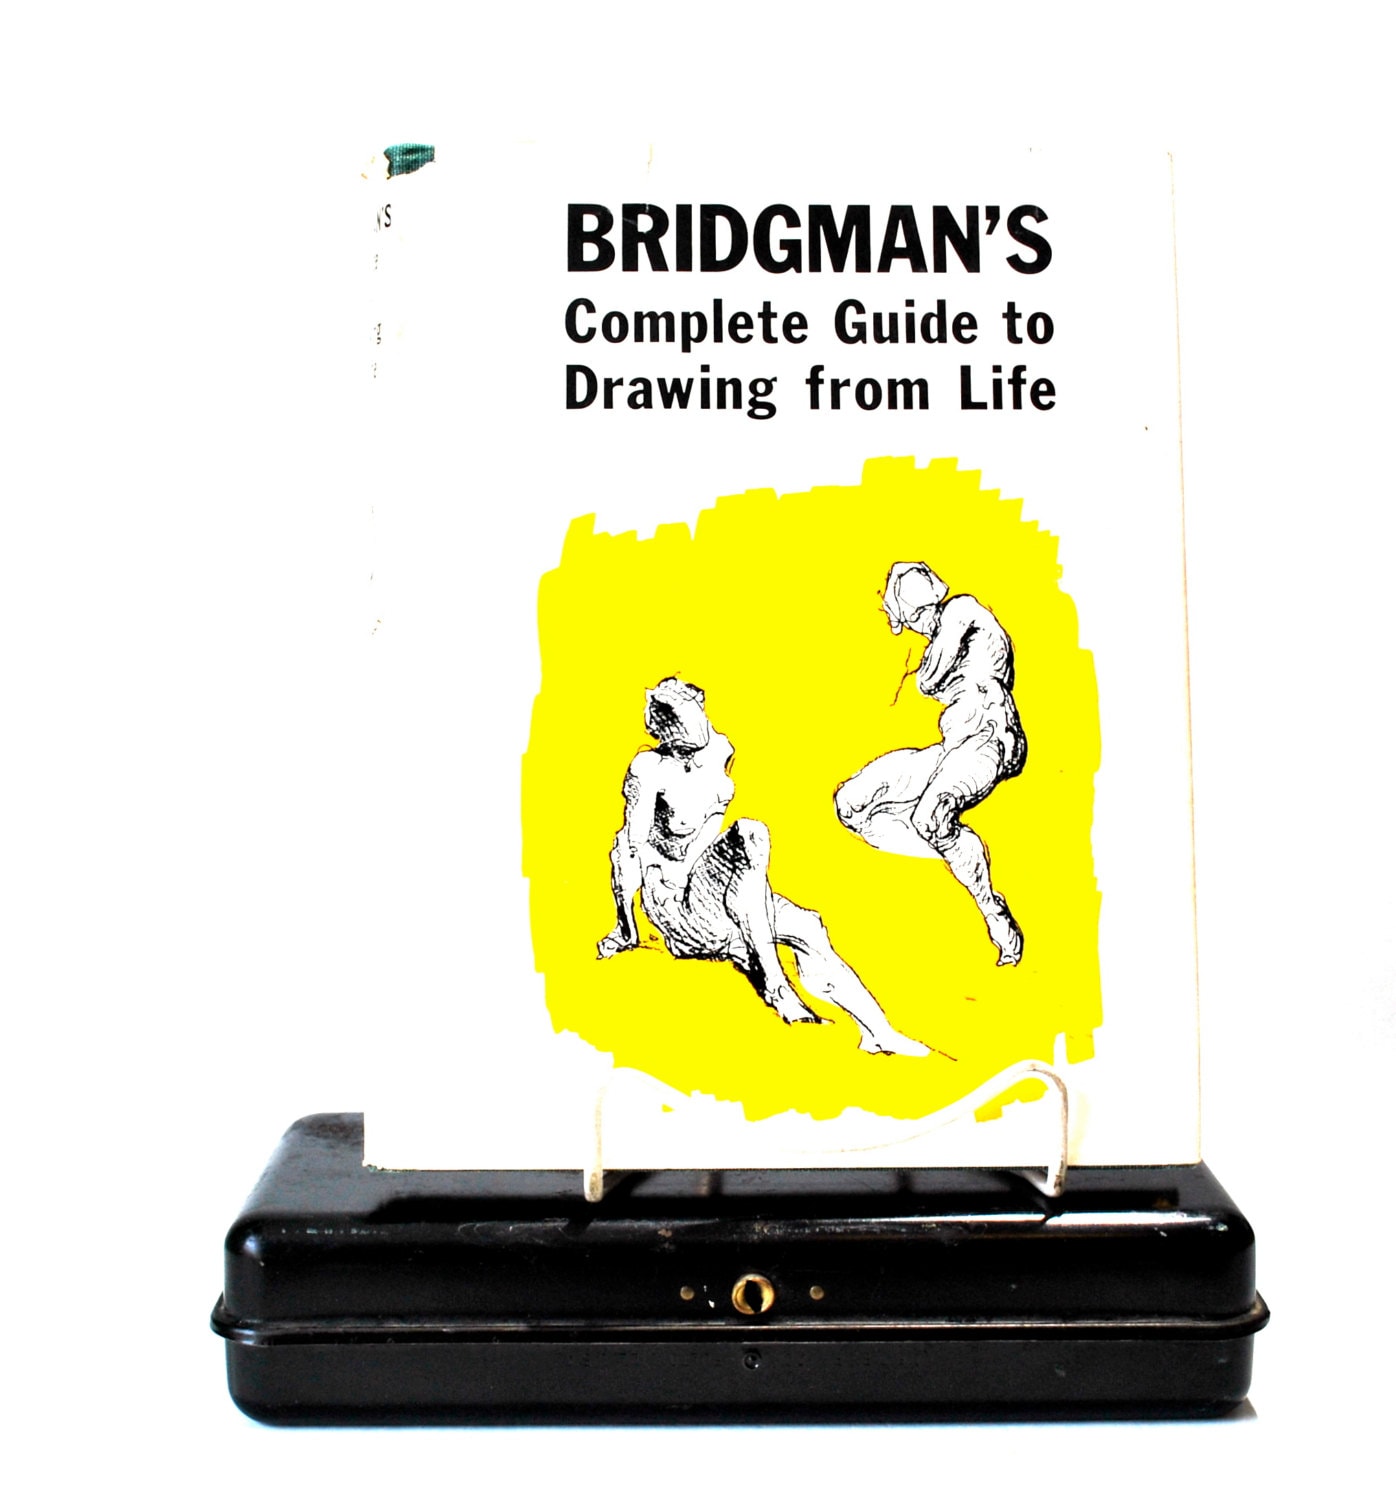 Bridgman's Complete Guide to Drawing From Life by VintageCleveland